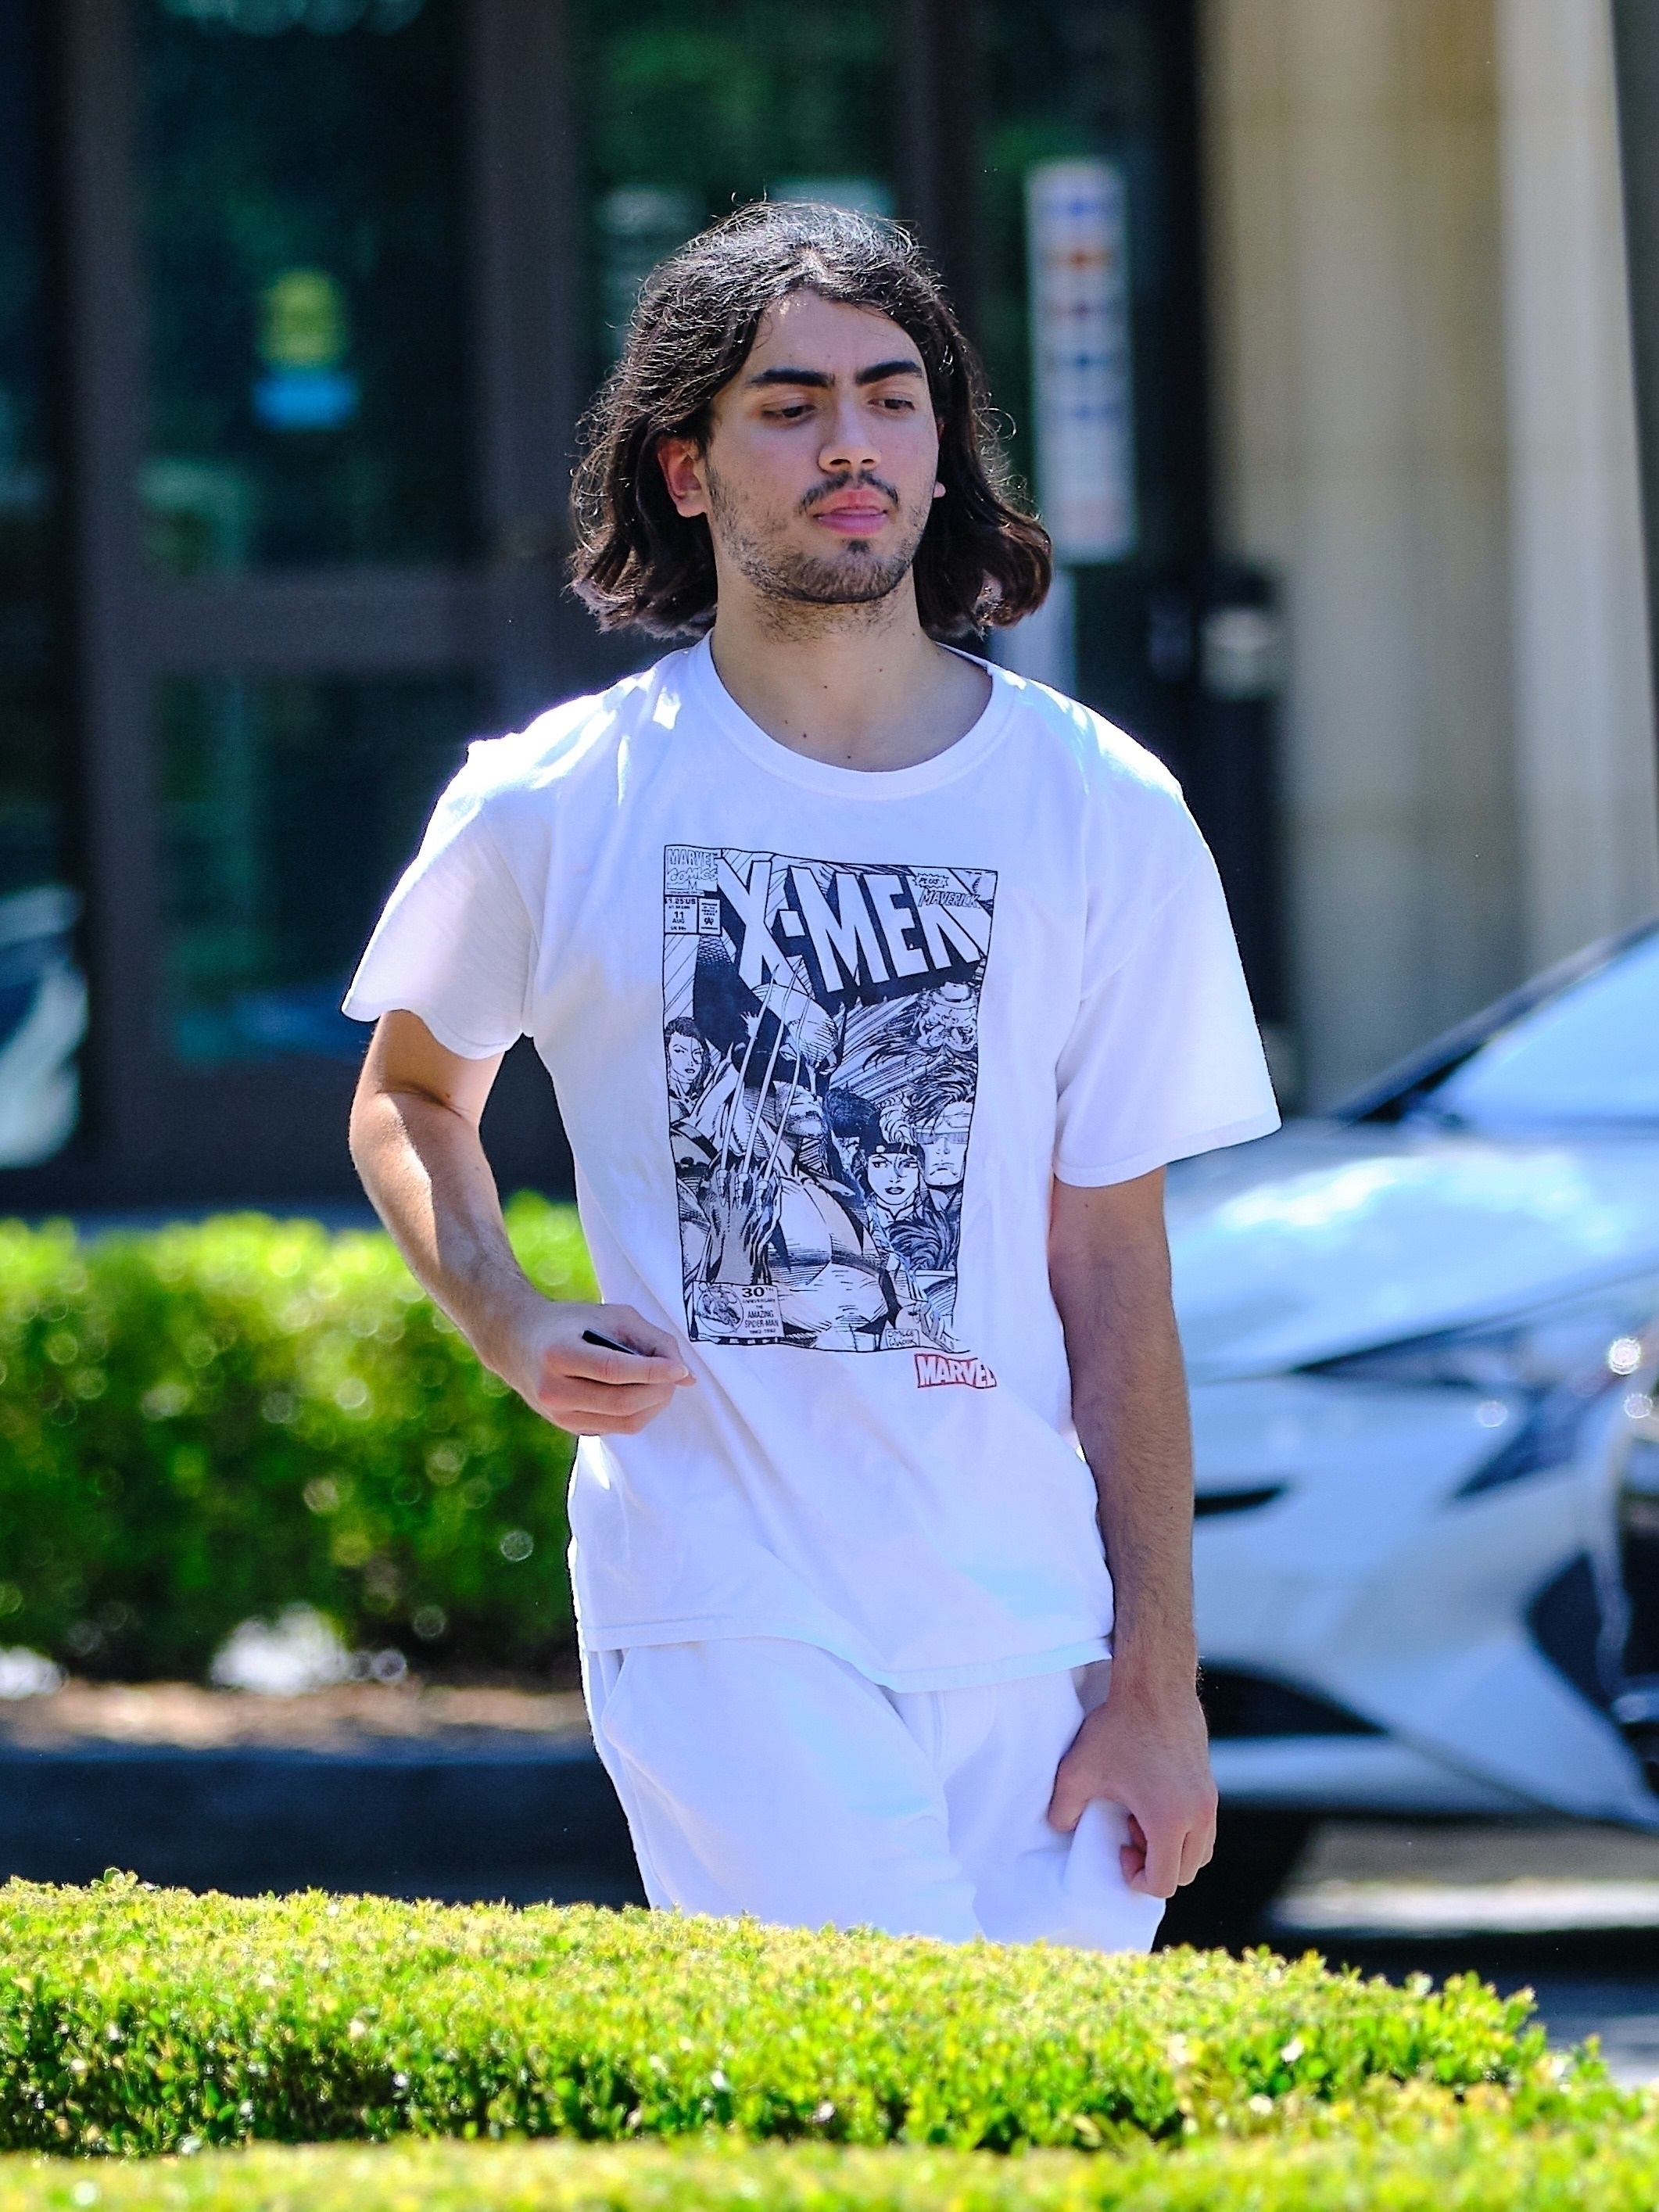 Blanket's brunette locks flowed to his shoulders and he rocked some facial hair